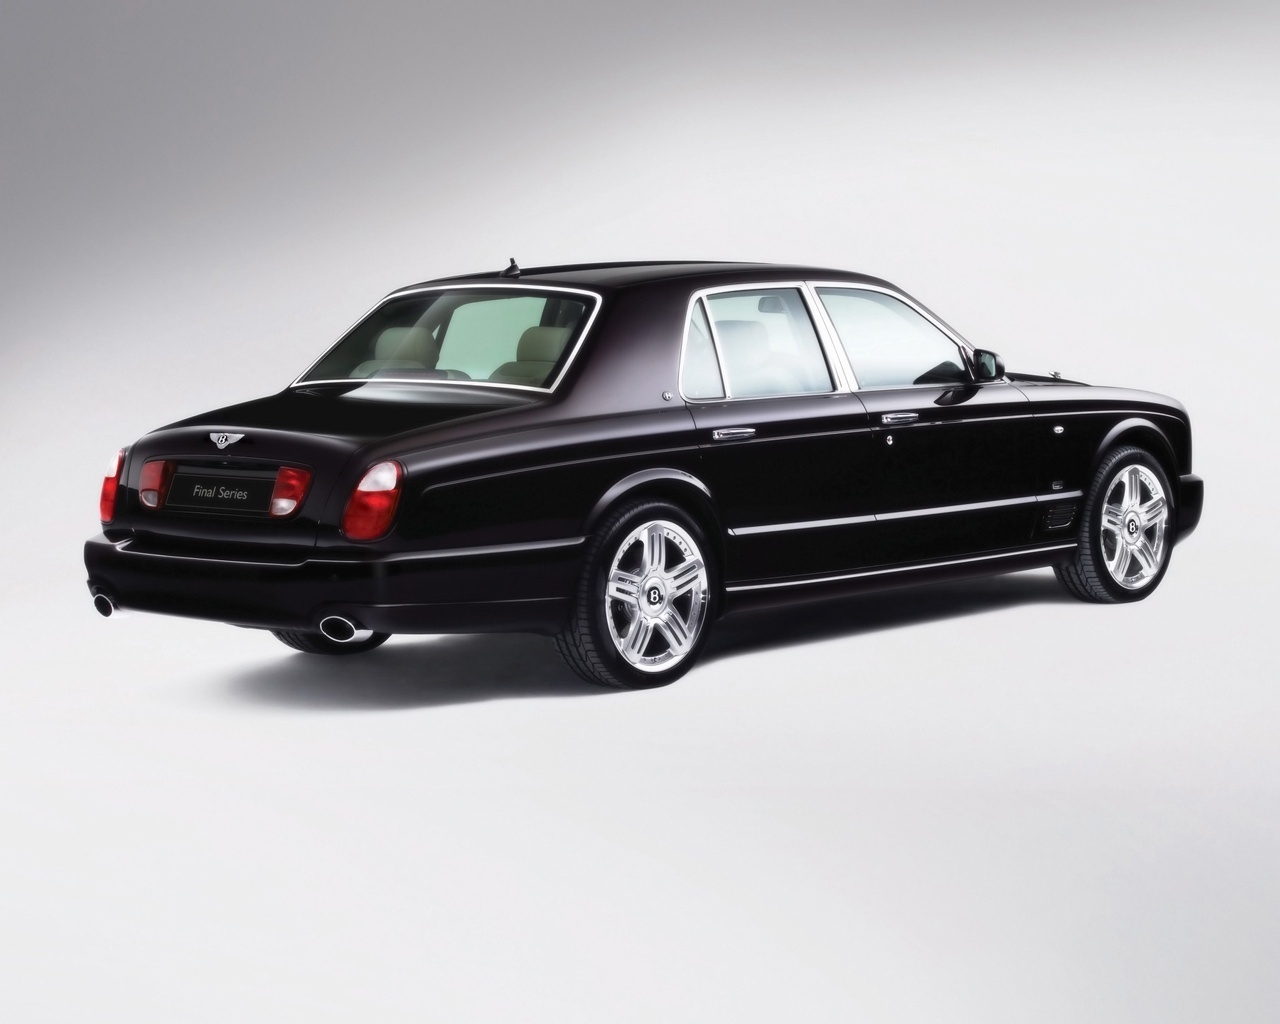 Bentley Arnage Final Series 2009 Rear for 1280 x 1024 resolution